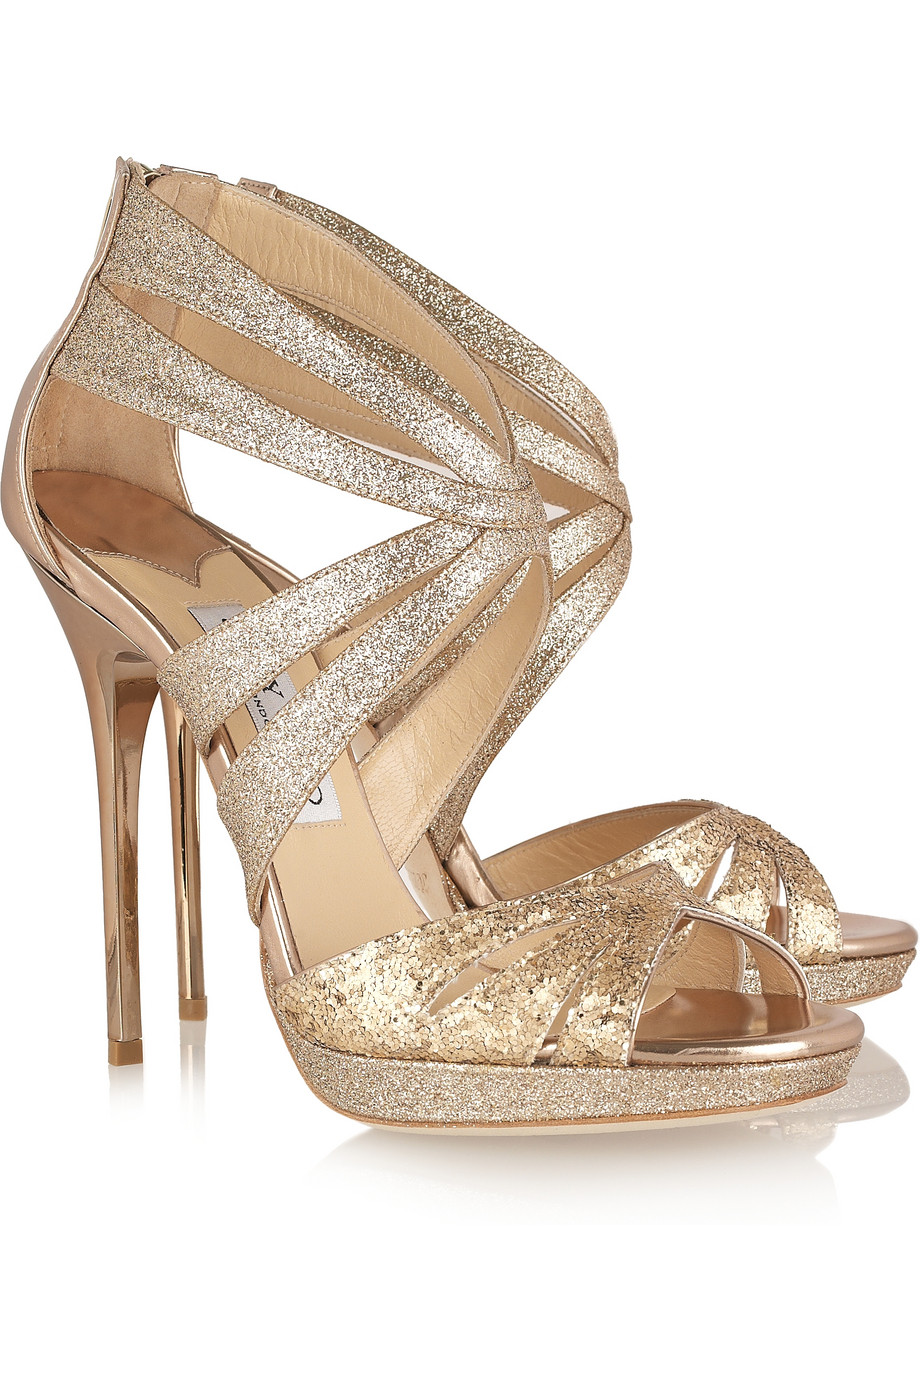 Jimmy Choo Garland Glitter-finish Leather Sandals in Gold | Lyst